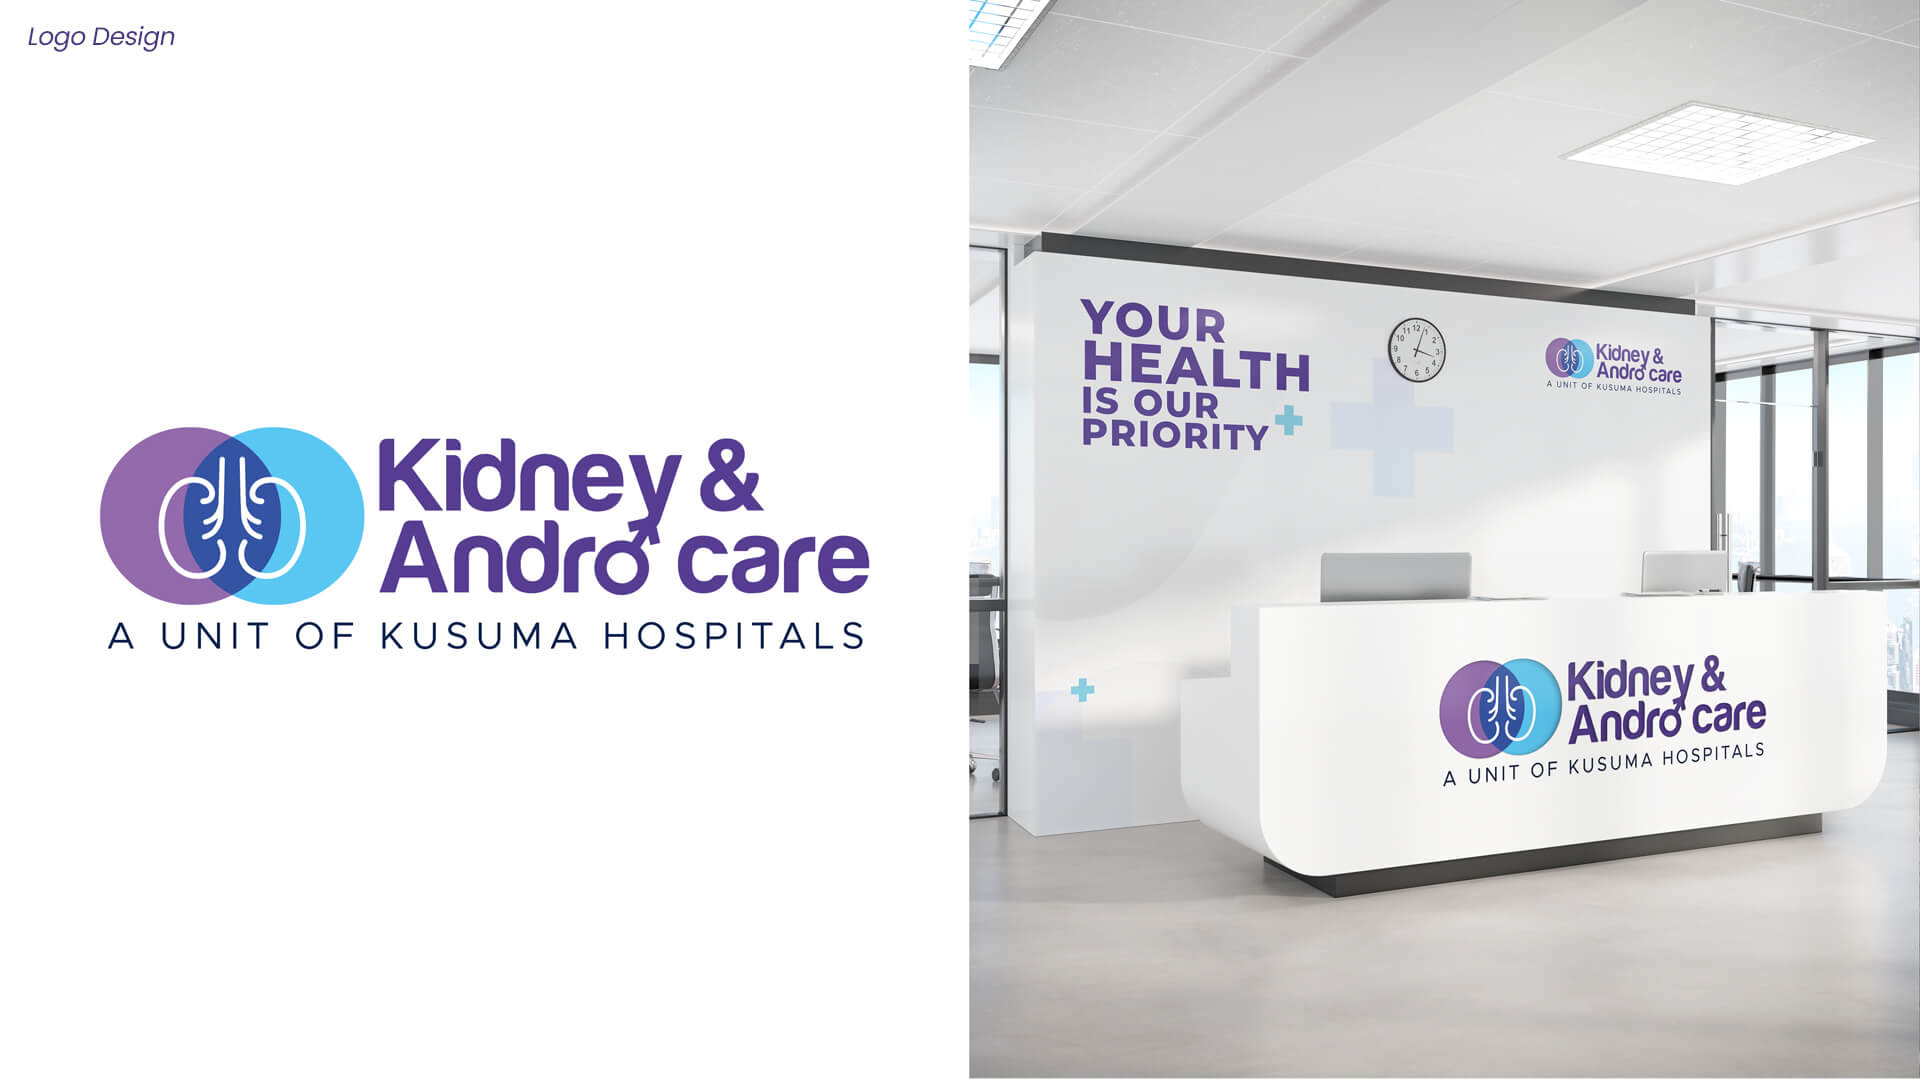 Kidney and Andro Care 1